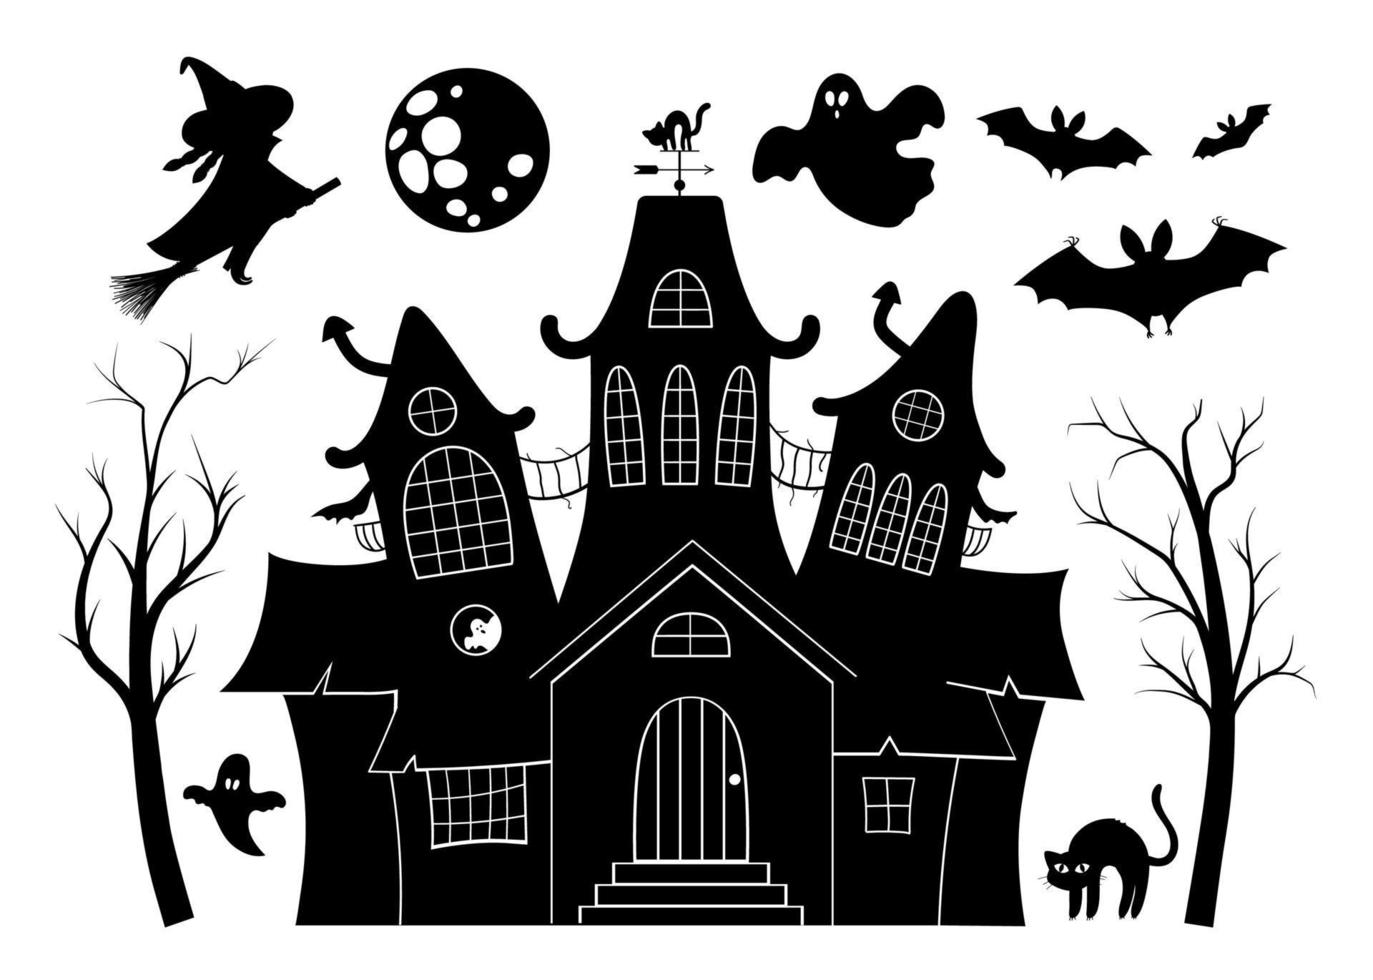 Vector haunted house black and white illustration set. Halloween silhouette elements of spooky cottage, big moon, ghost, bats, trees. Scary Samhain party invitation or card design.